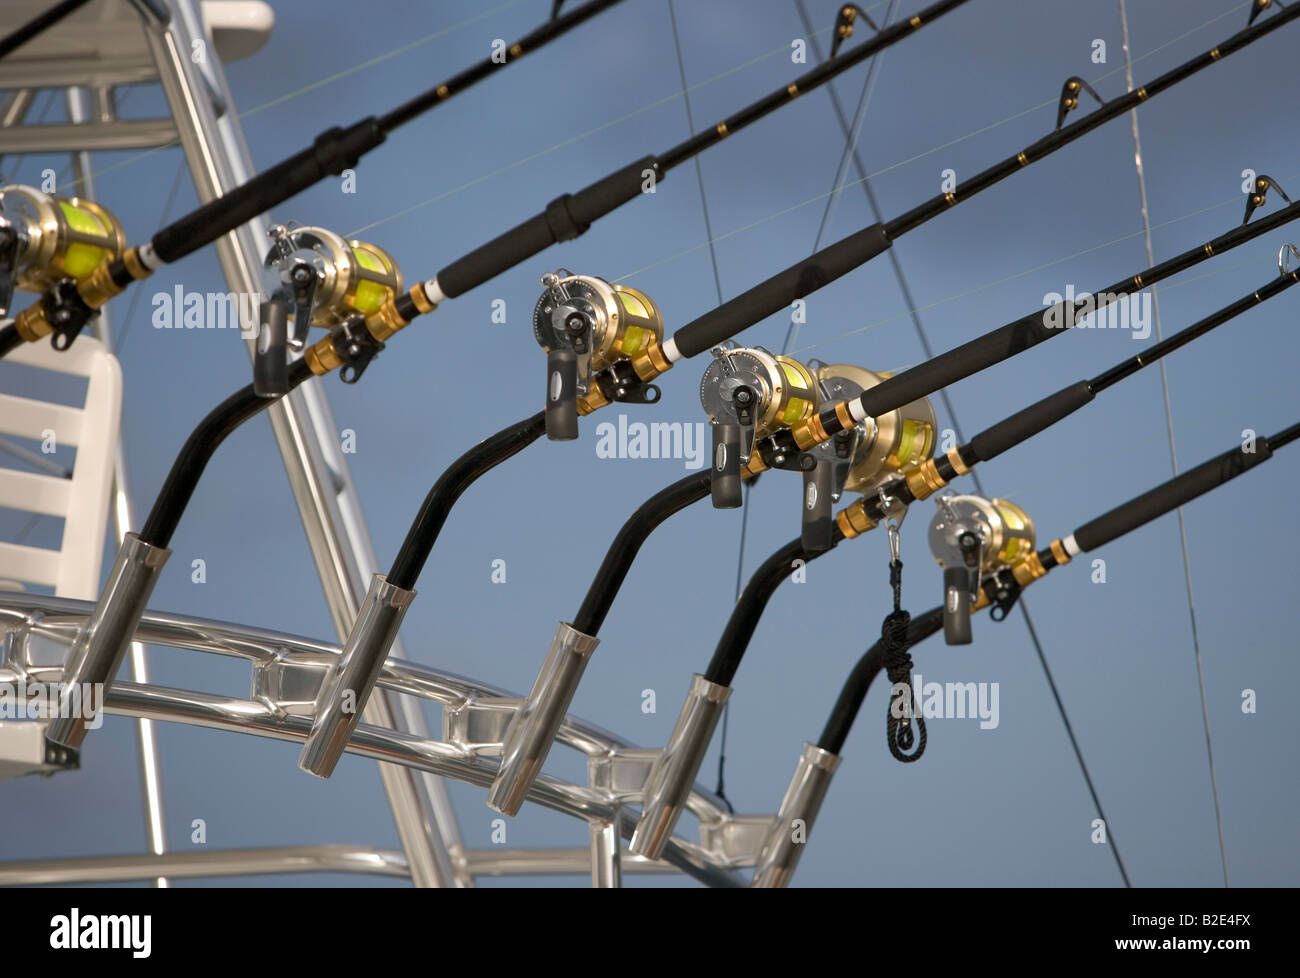 An Array of fishing poles in rod holders on a large commercial charter sport fishing boat Stock Photo